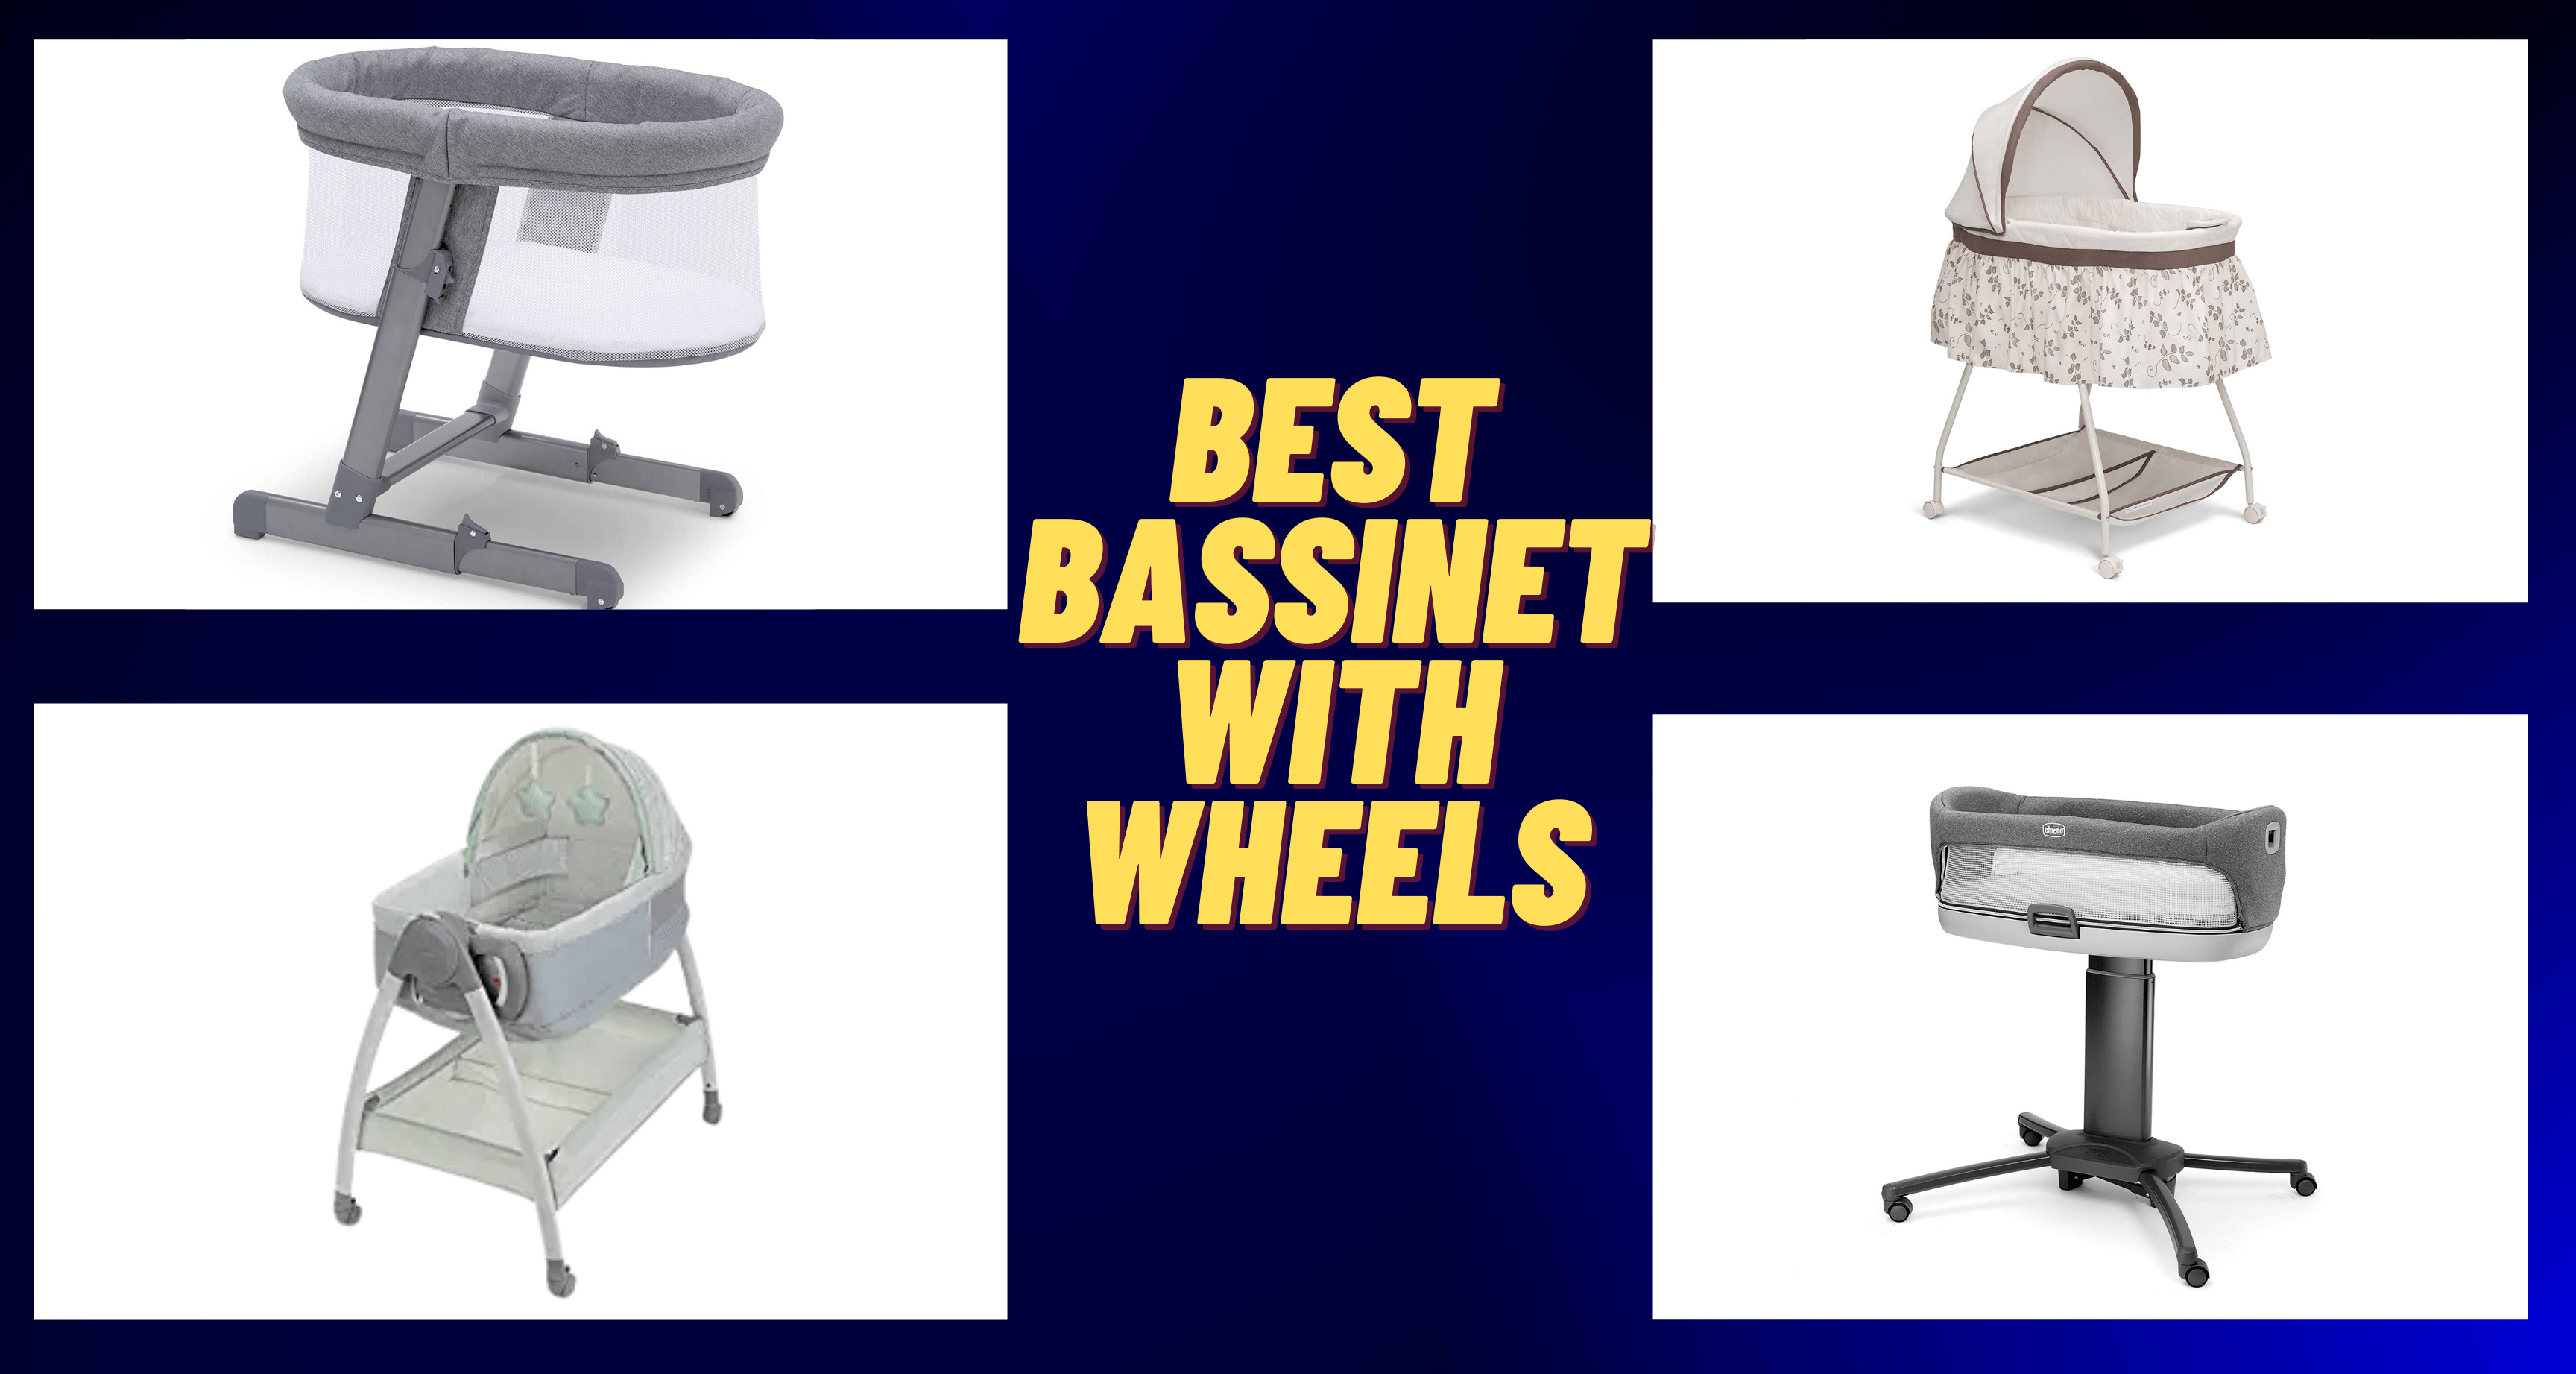 Best Bassinet with Wheels - Infoparenting